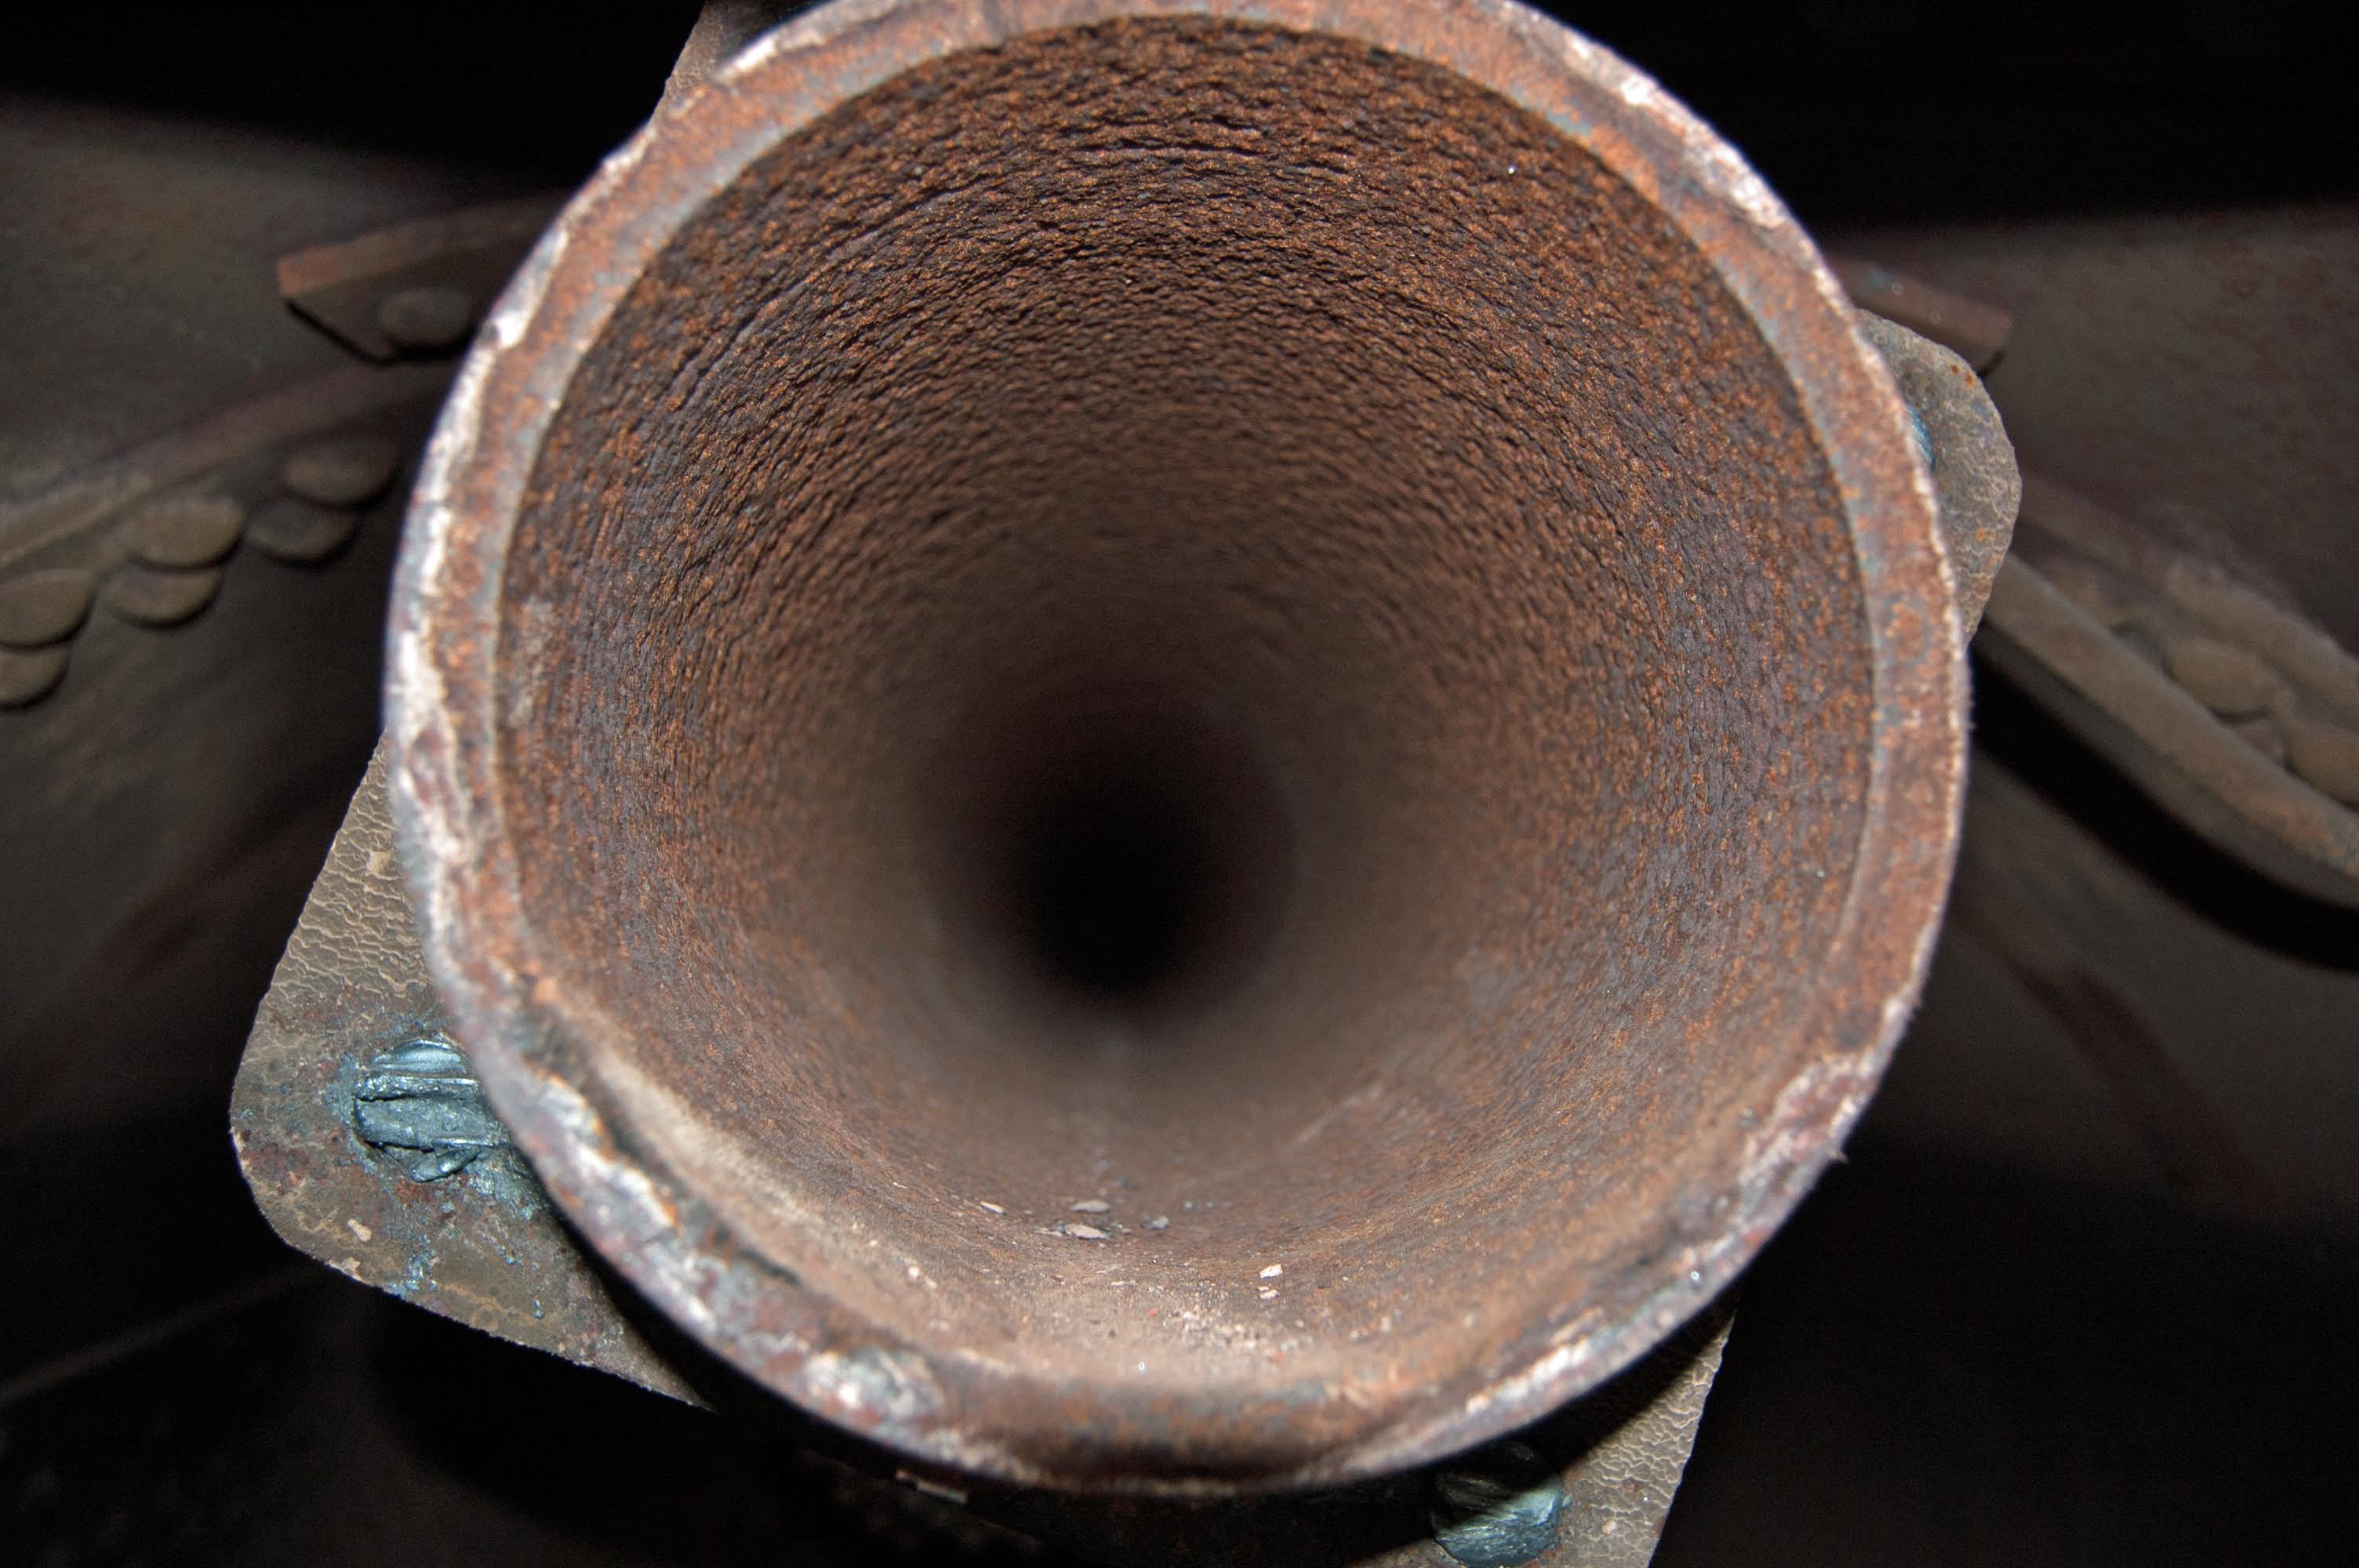 The inside of the main steam pipe, taken from the position of the regulator